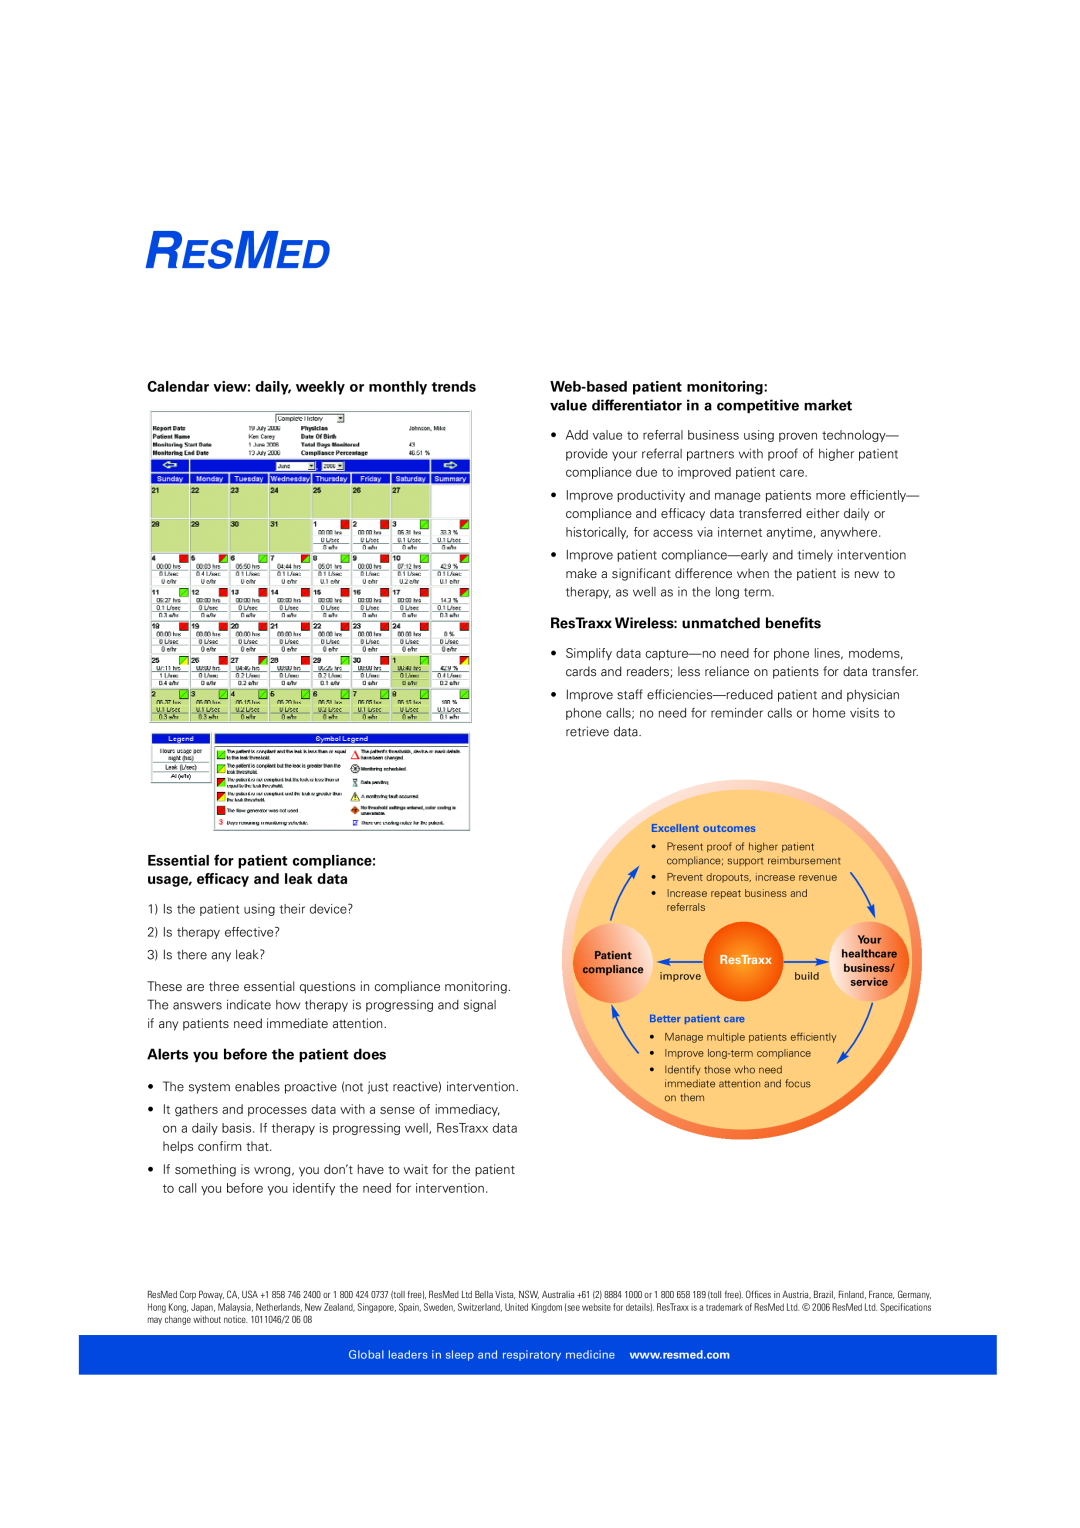 ResMed ResTraxx System manual Calendar view daily, weekly or monthly trends, Web-based patient monitoring 